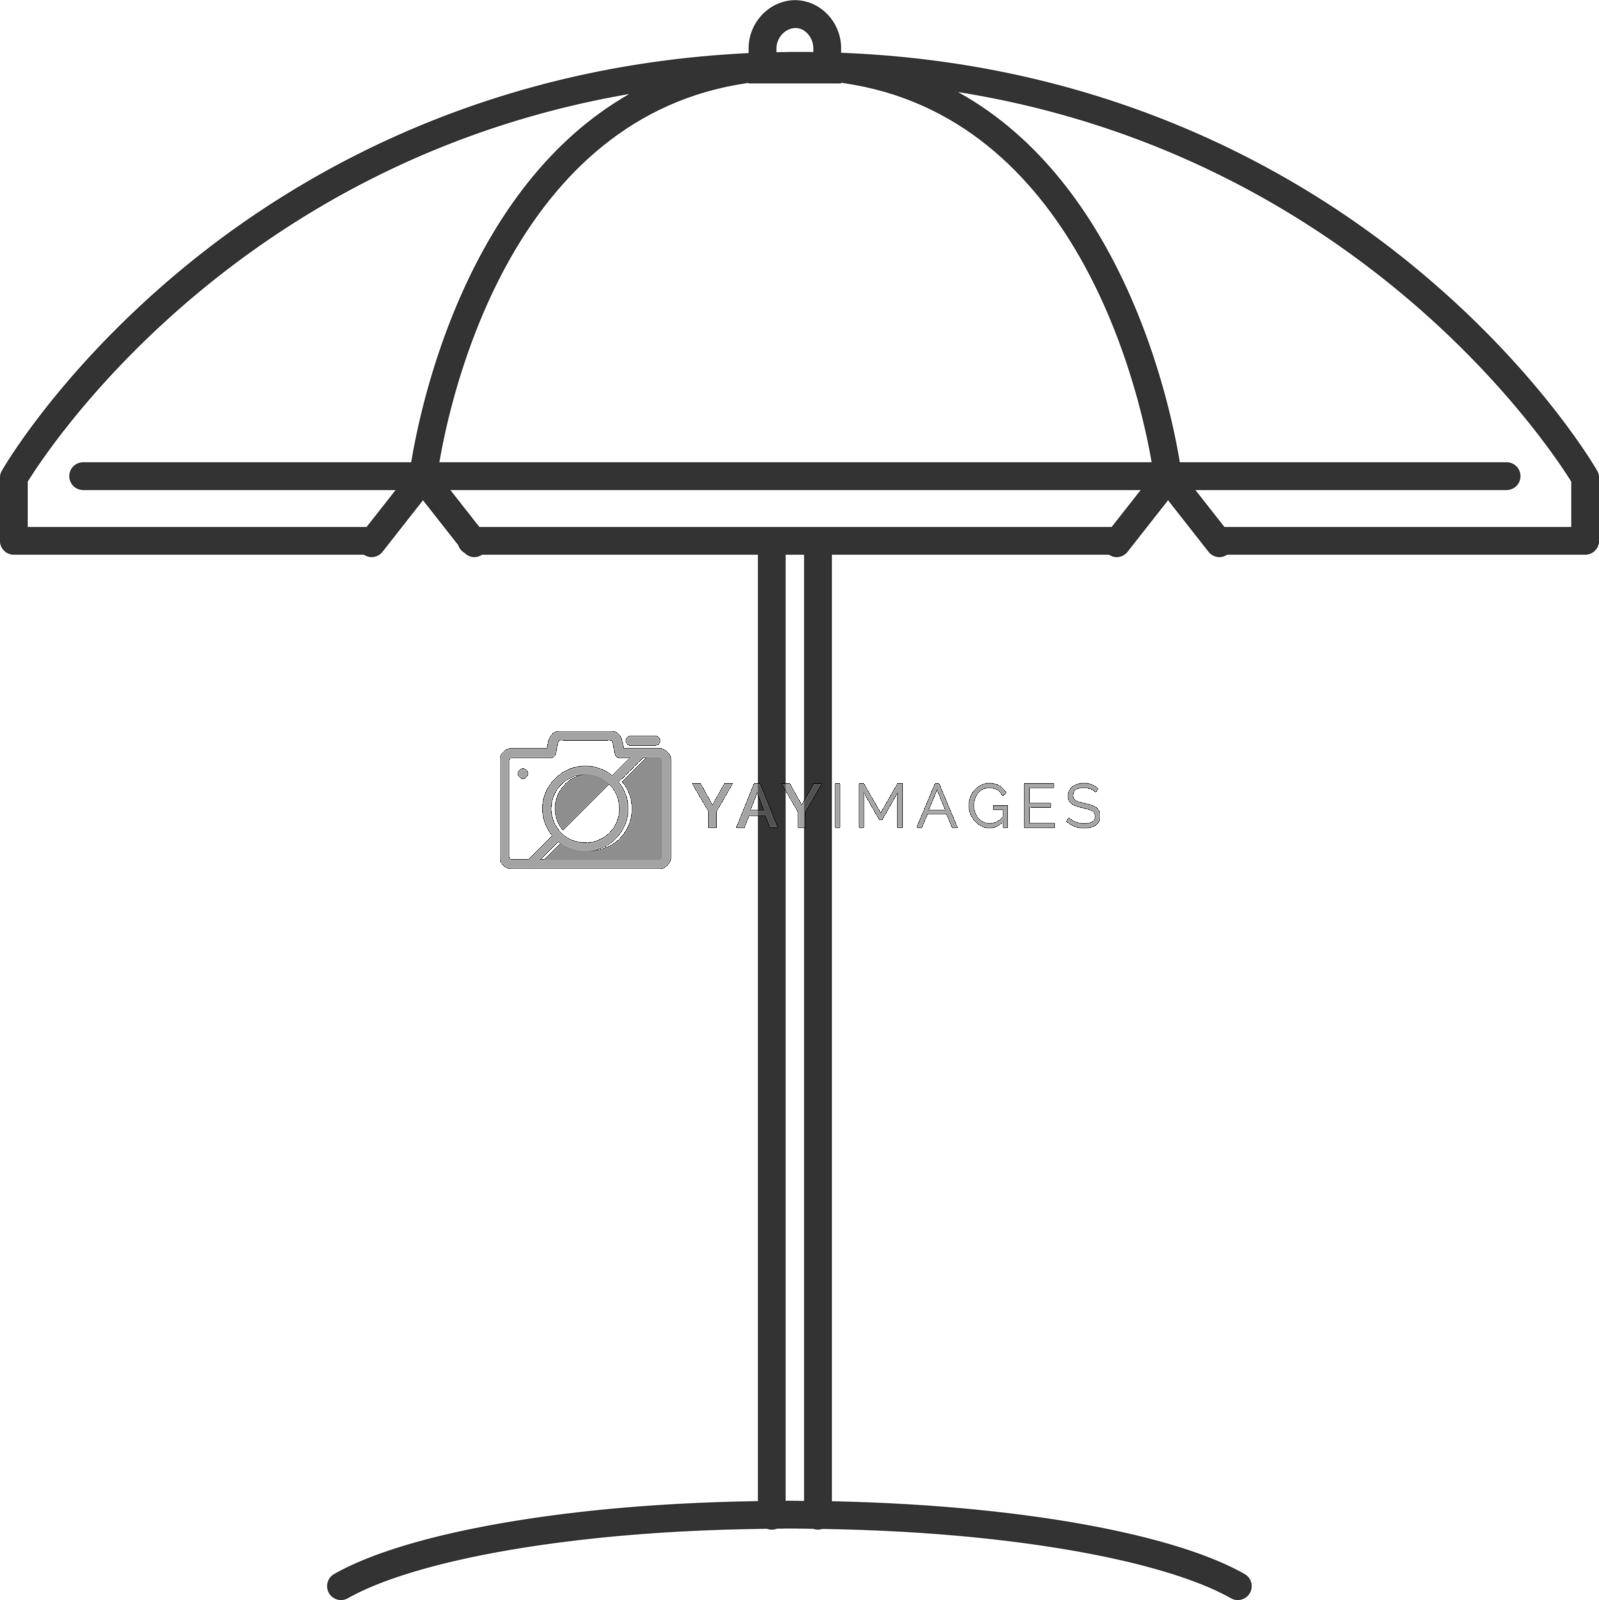 Royalty free image of Beach umbrella linear icon by bsd